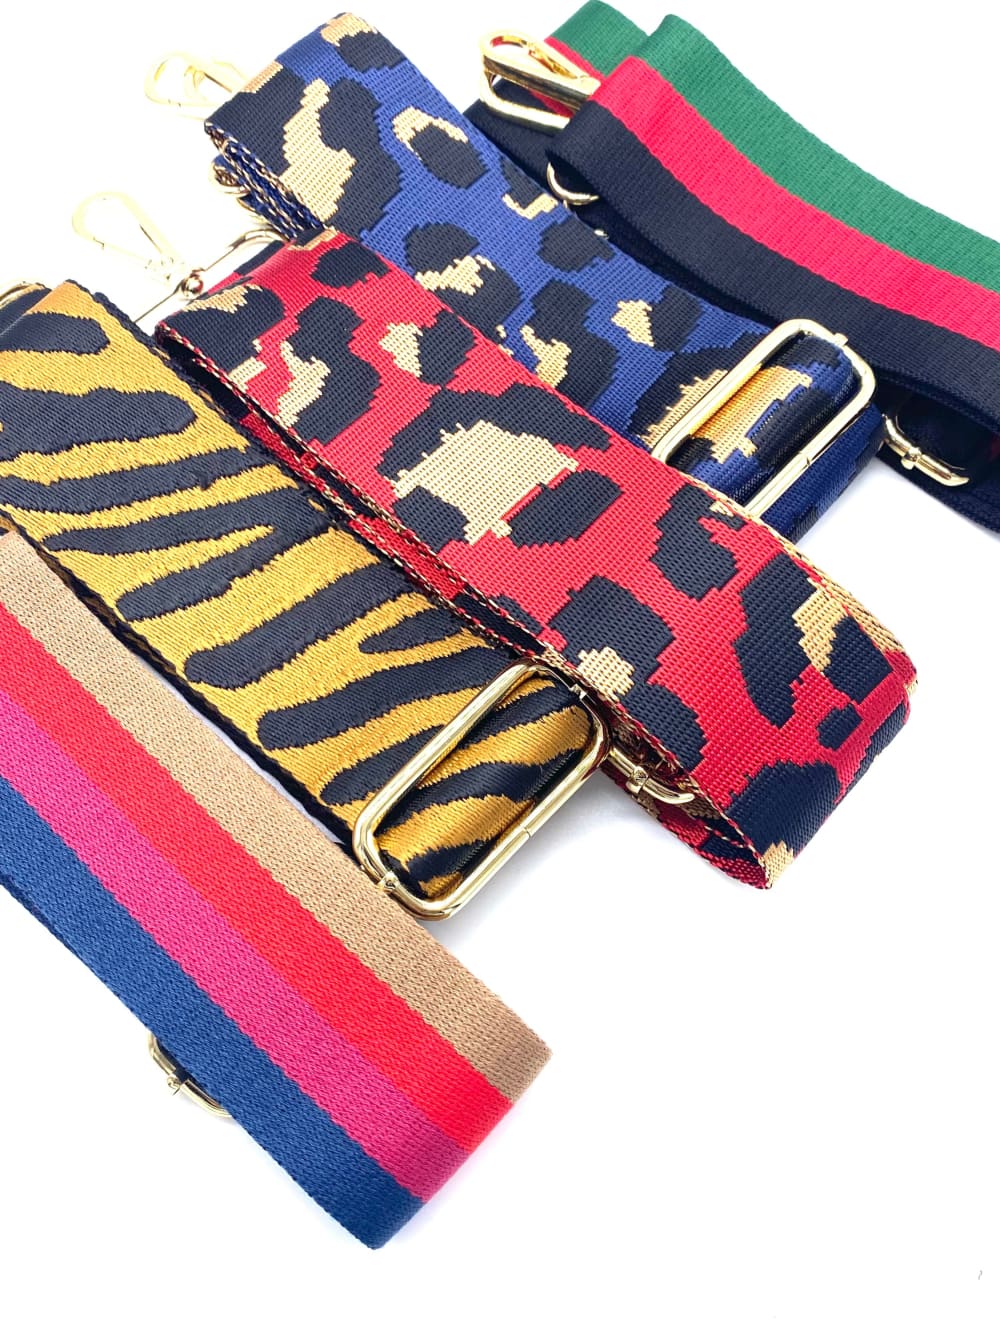 LOUIS VUITTON guitar straps and tassels • CUSTOM MADE • $200 and